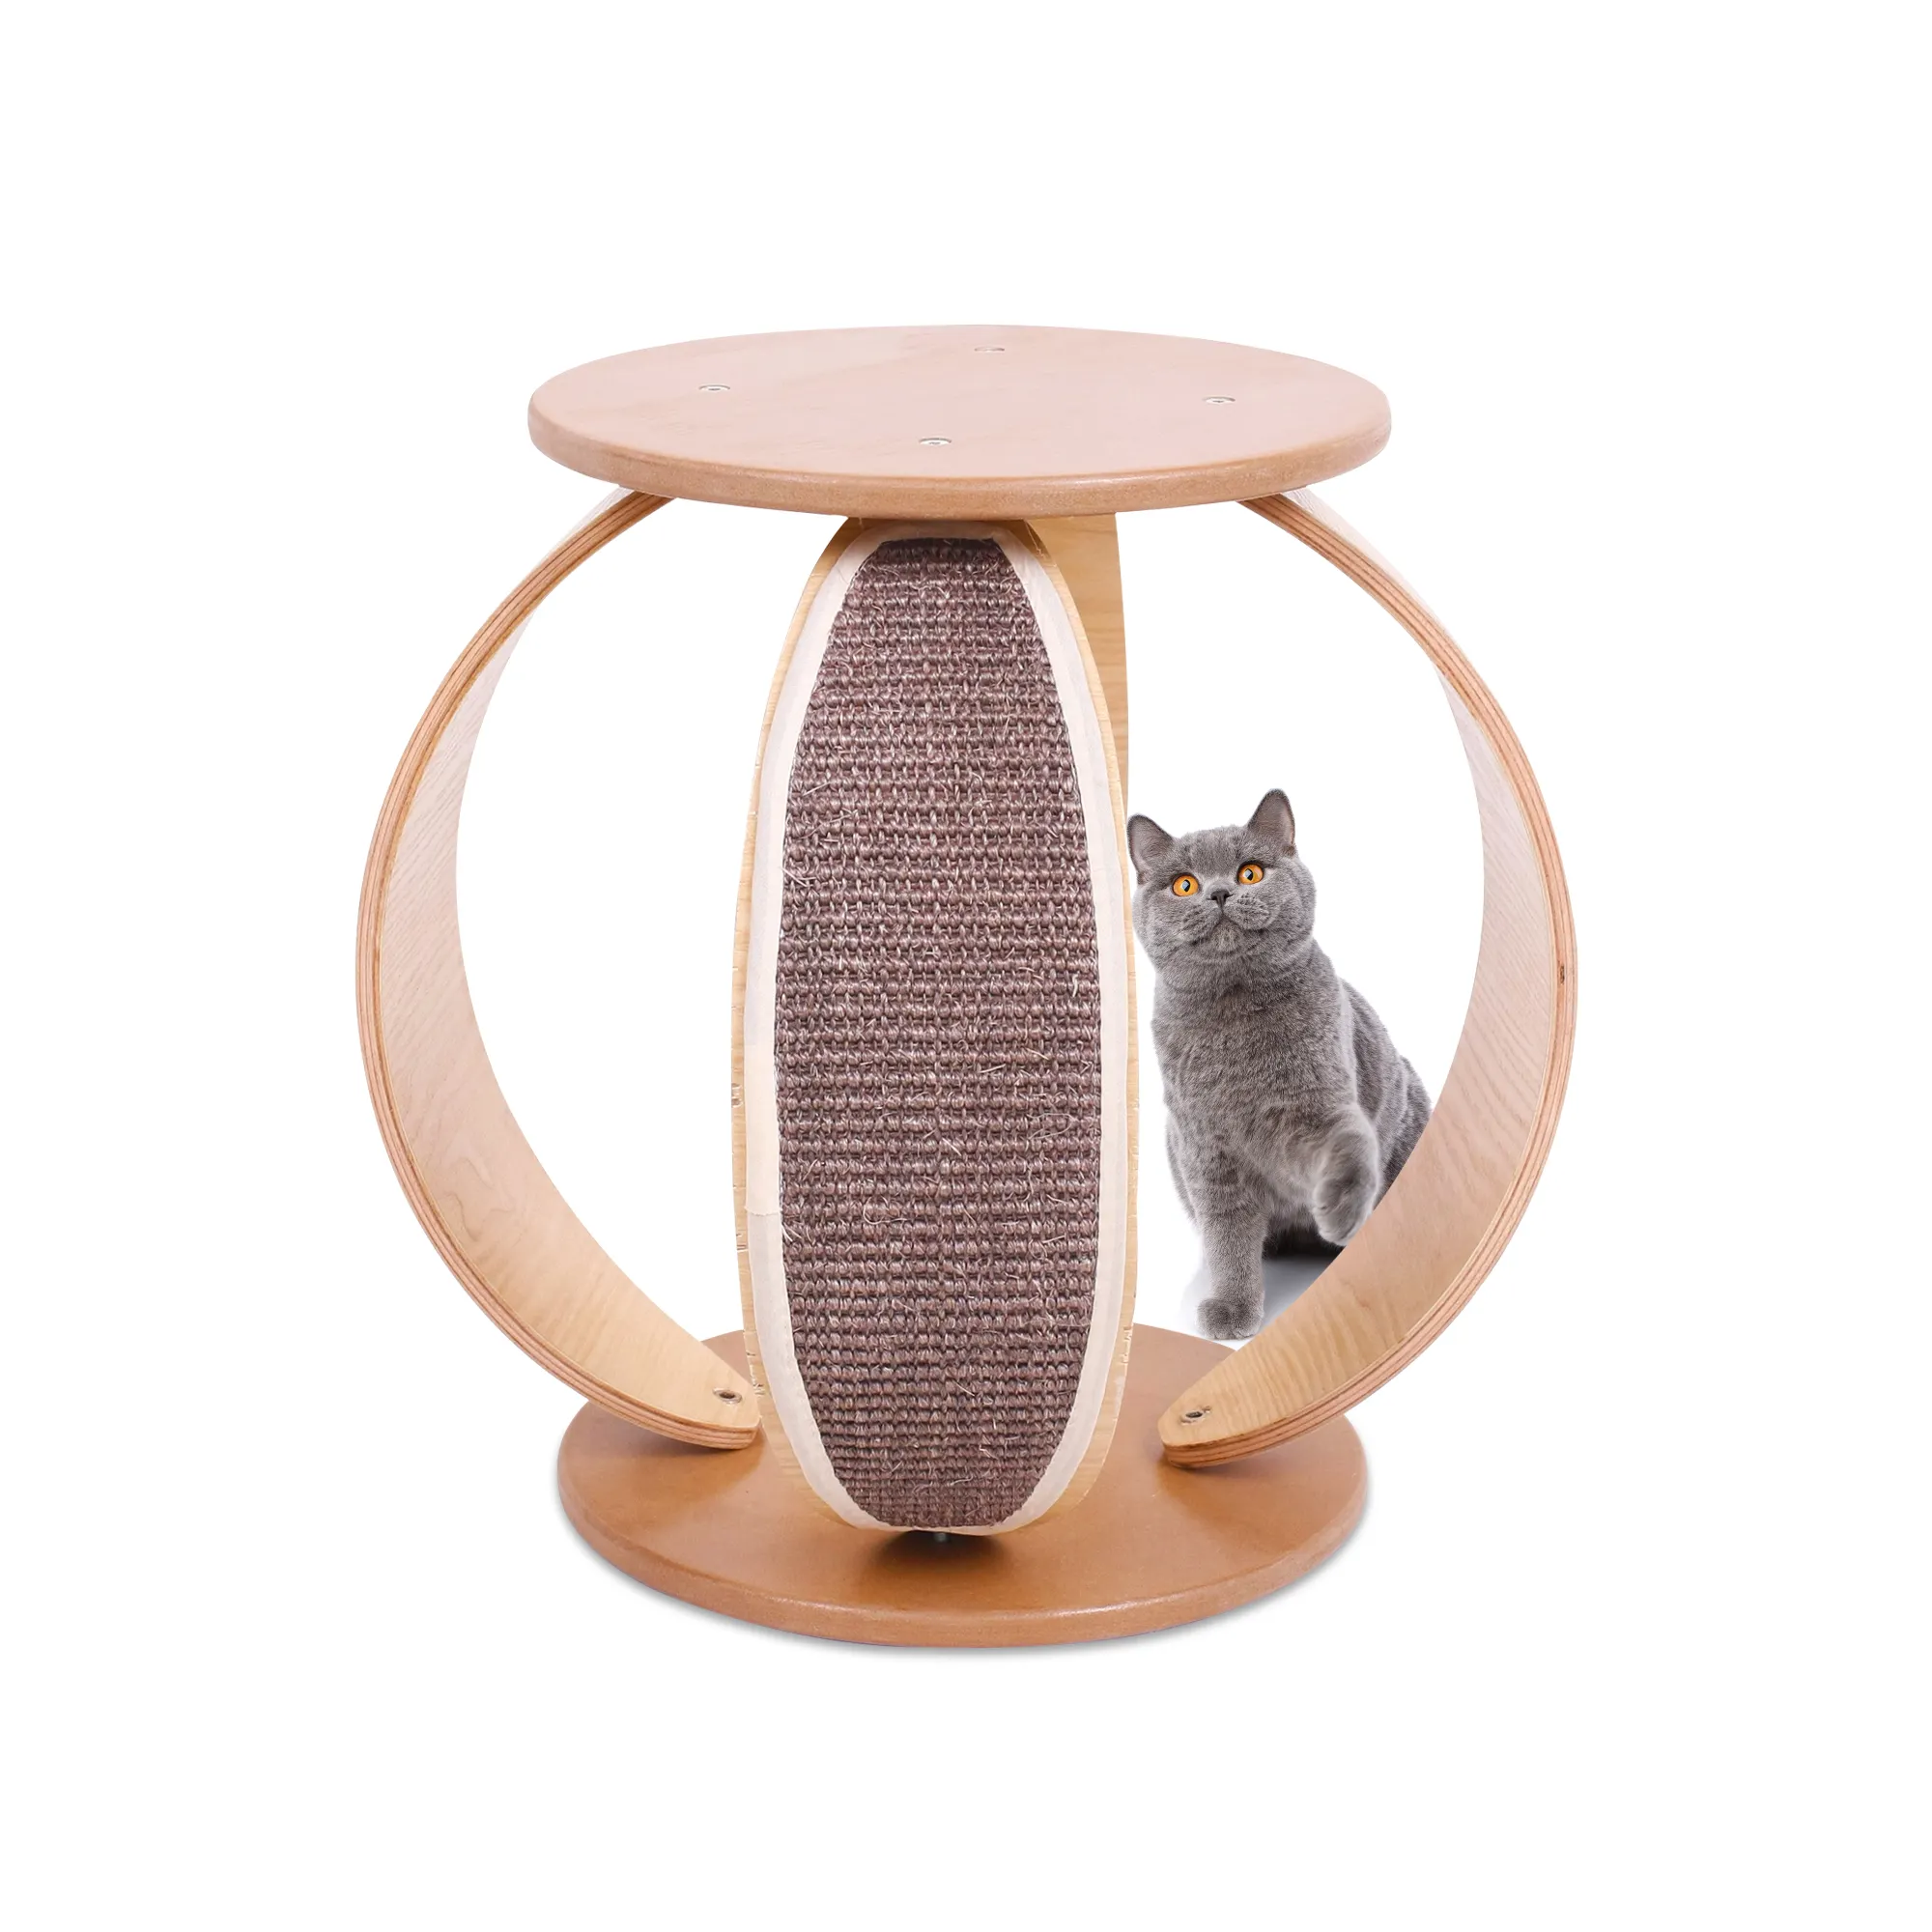 Indoor Funny Cat Tree Basket Play House Wooden Cat Tower Natural Paradise Cat Furniture